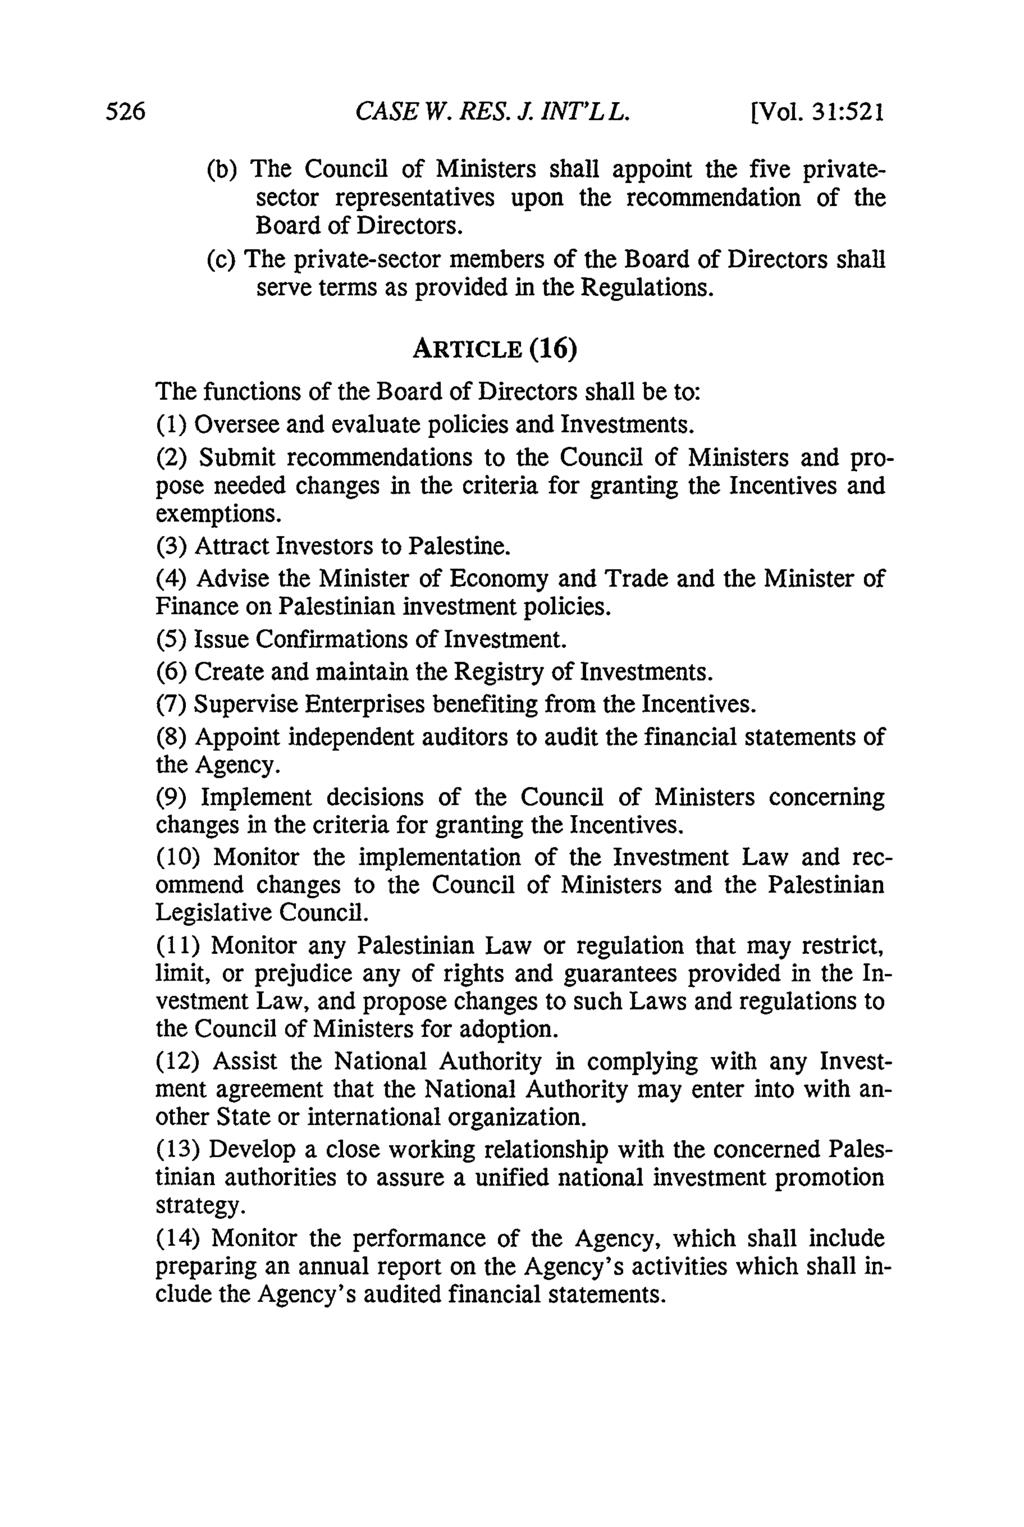 526 CASE W. RES. J. INT'L L. [Vol. 31:521 (b) The Council of Ministers shall appoint the five privatesector representatives upon the recommendation of the Board of Directors.